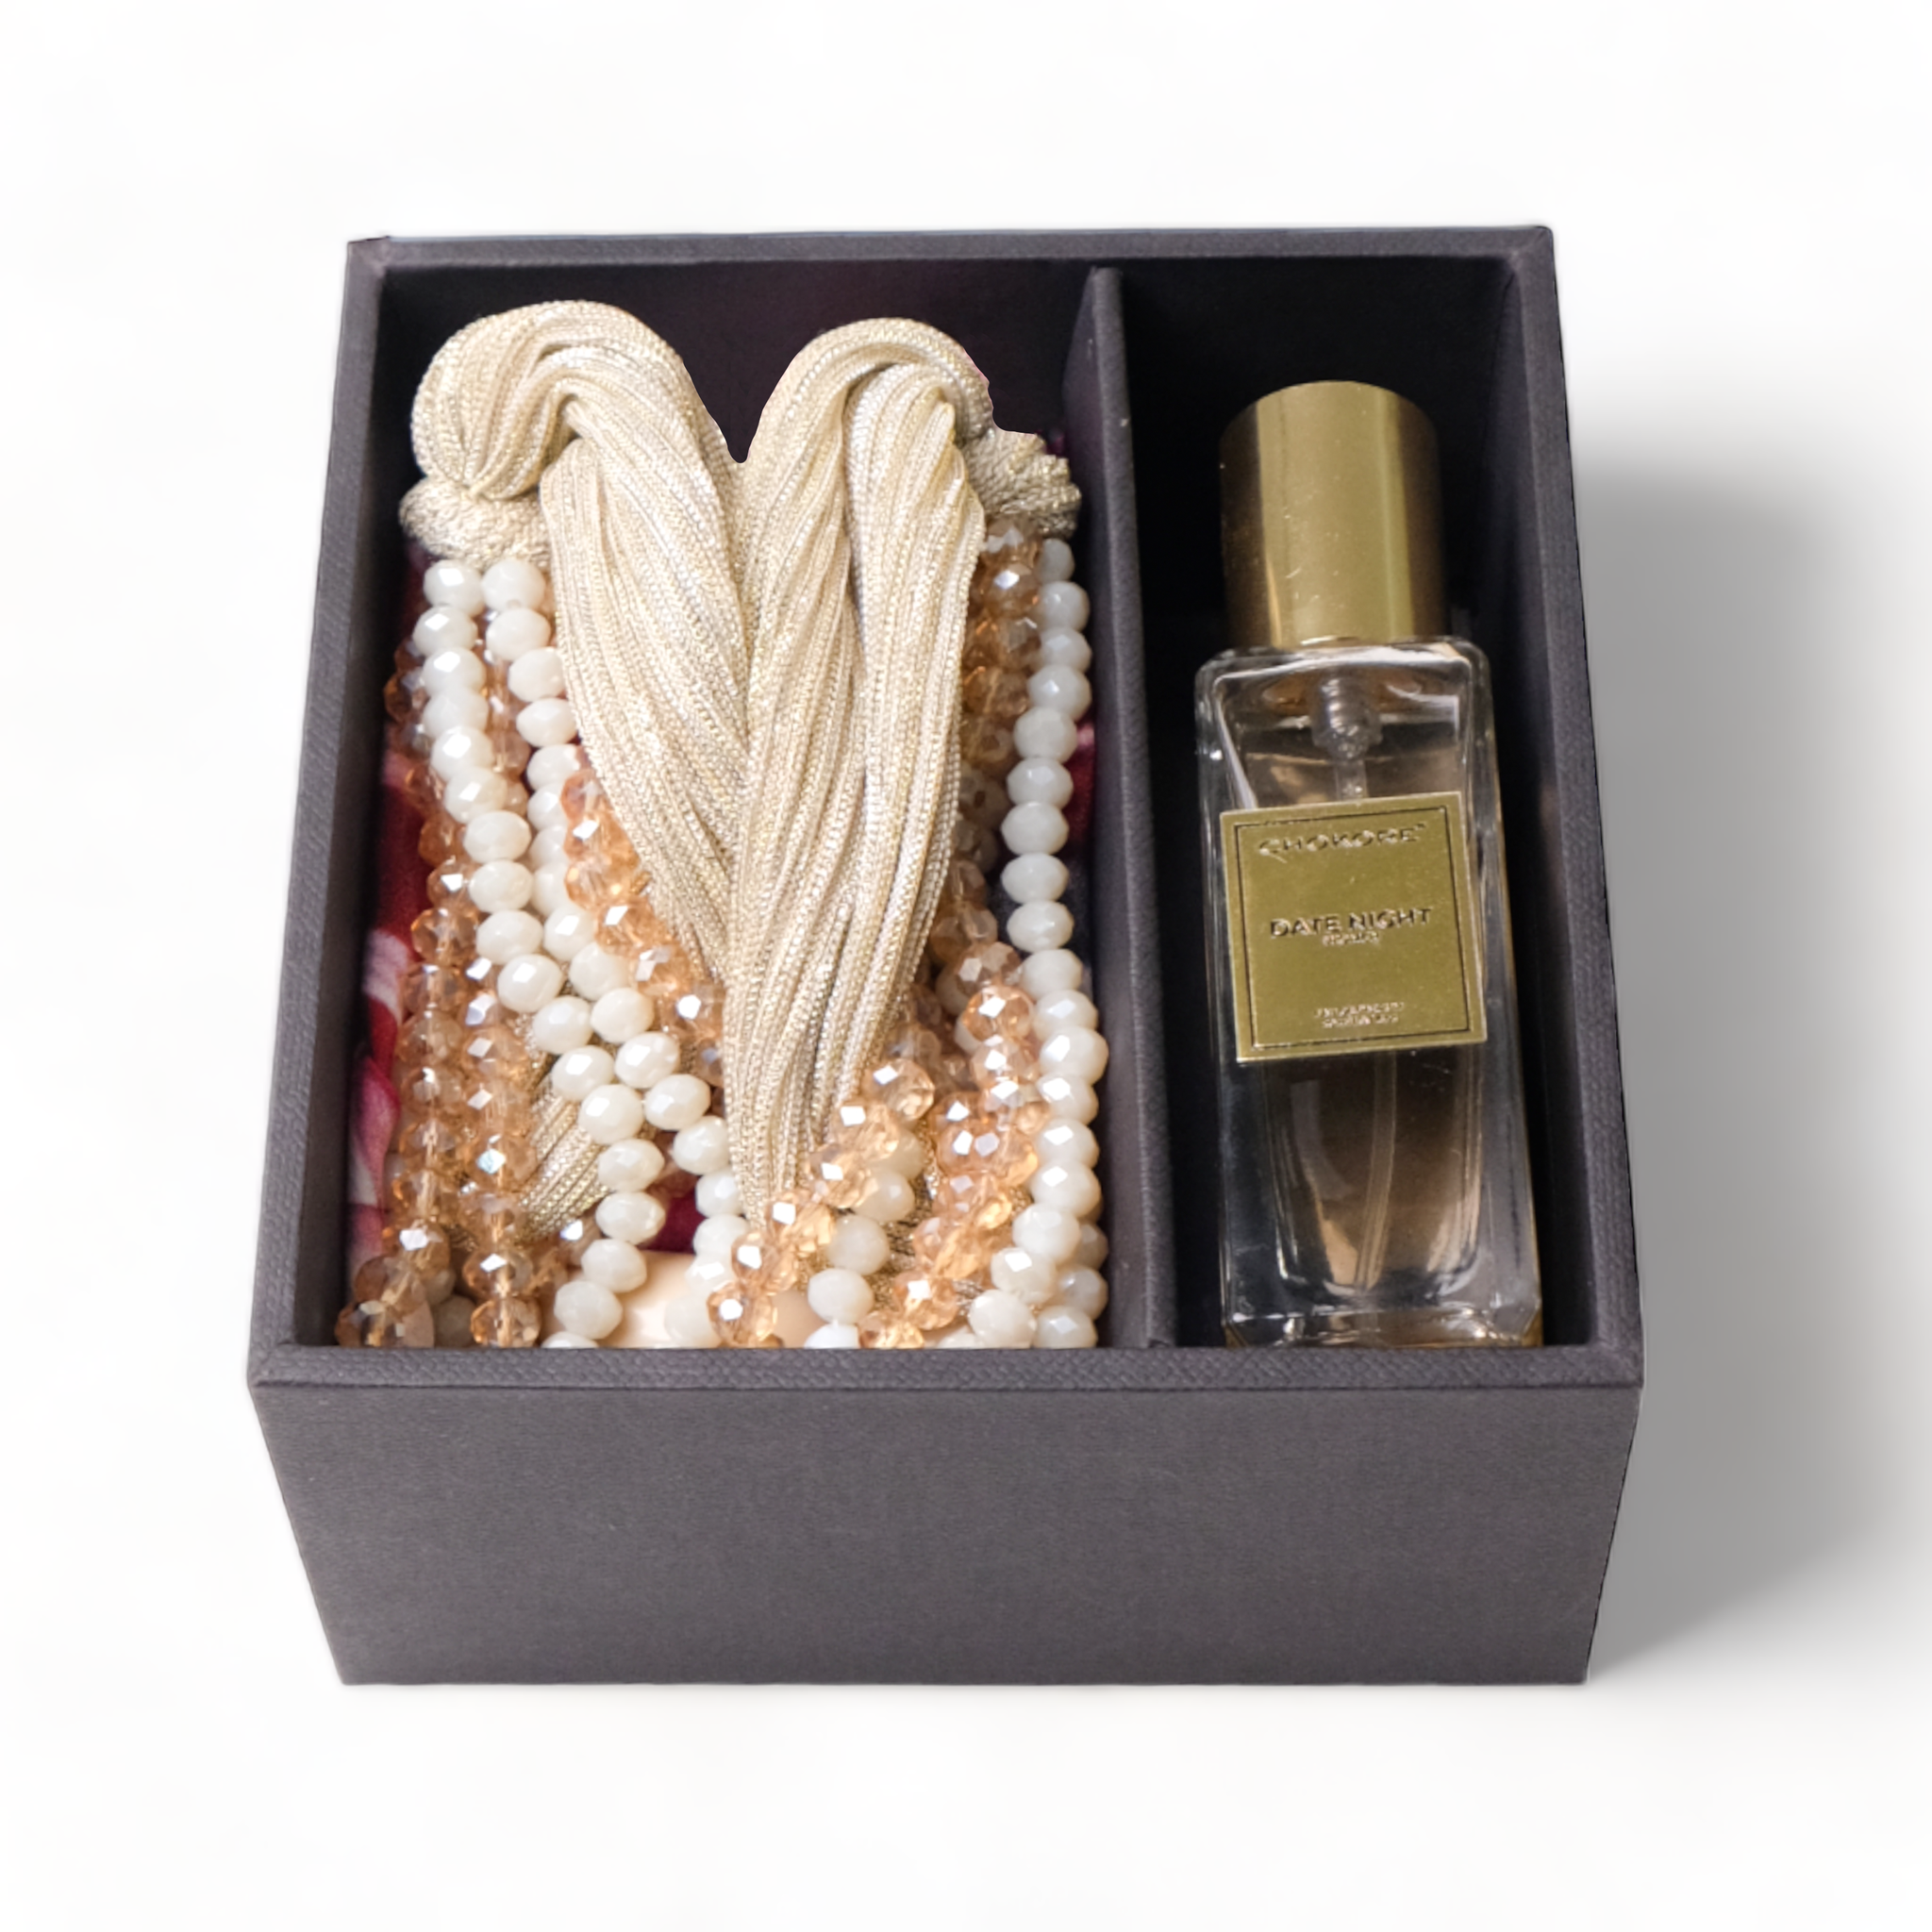 Chokore Special 2-in-1 Gift Set for Her (Multilayer Crystal Necklace & 20 ml Date Night Perfume)